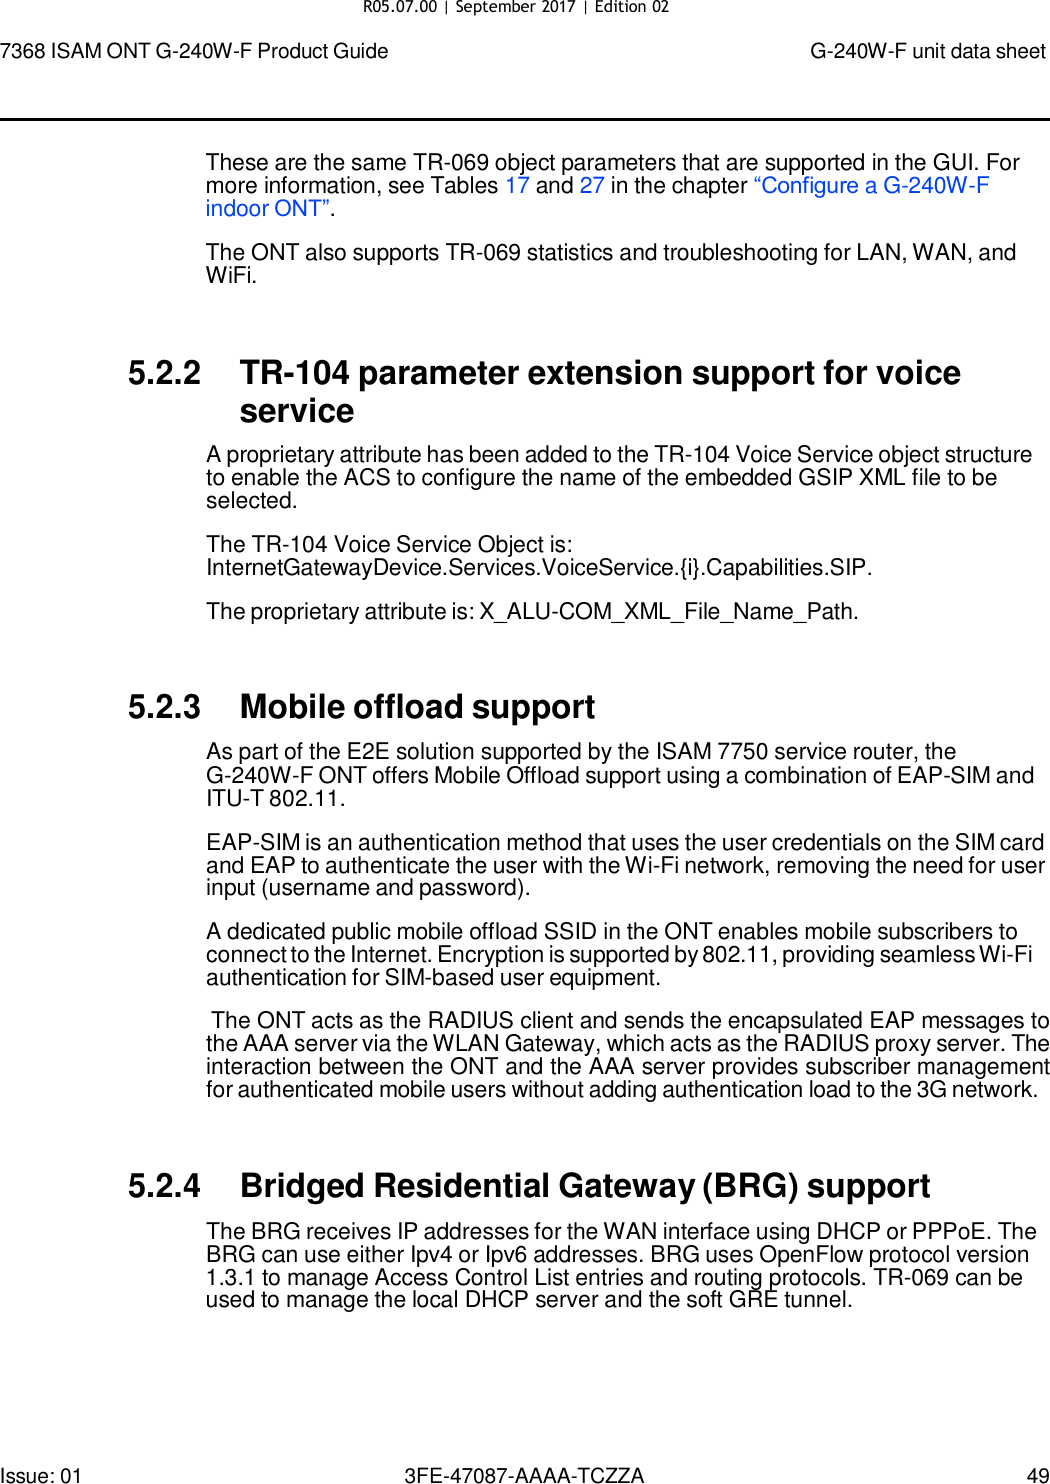 Page 46 of Nokia Bell G240WFV2 7368 ISAM GPON ONU User Manual 7368 ISAM ONT G 240W F Product Guide